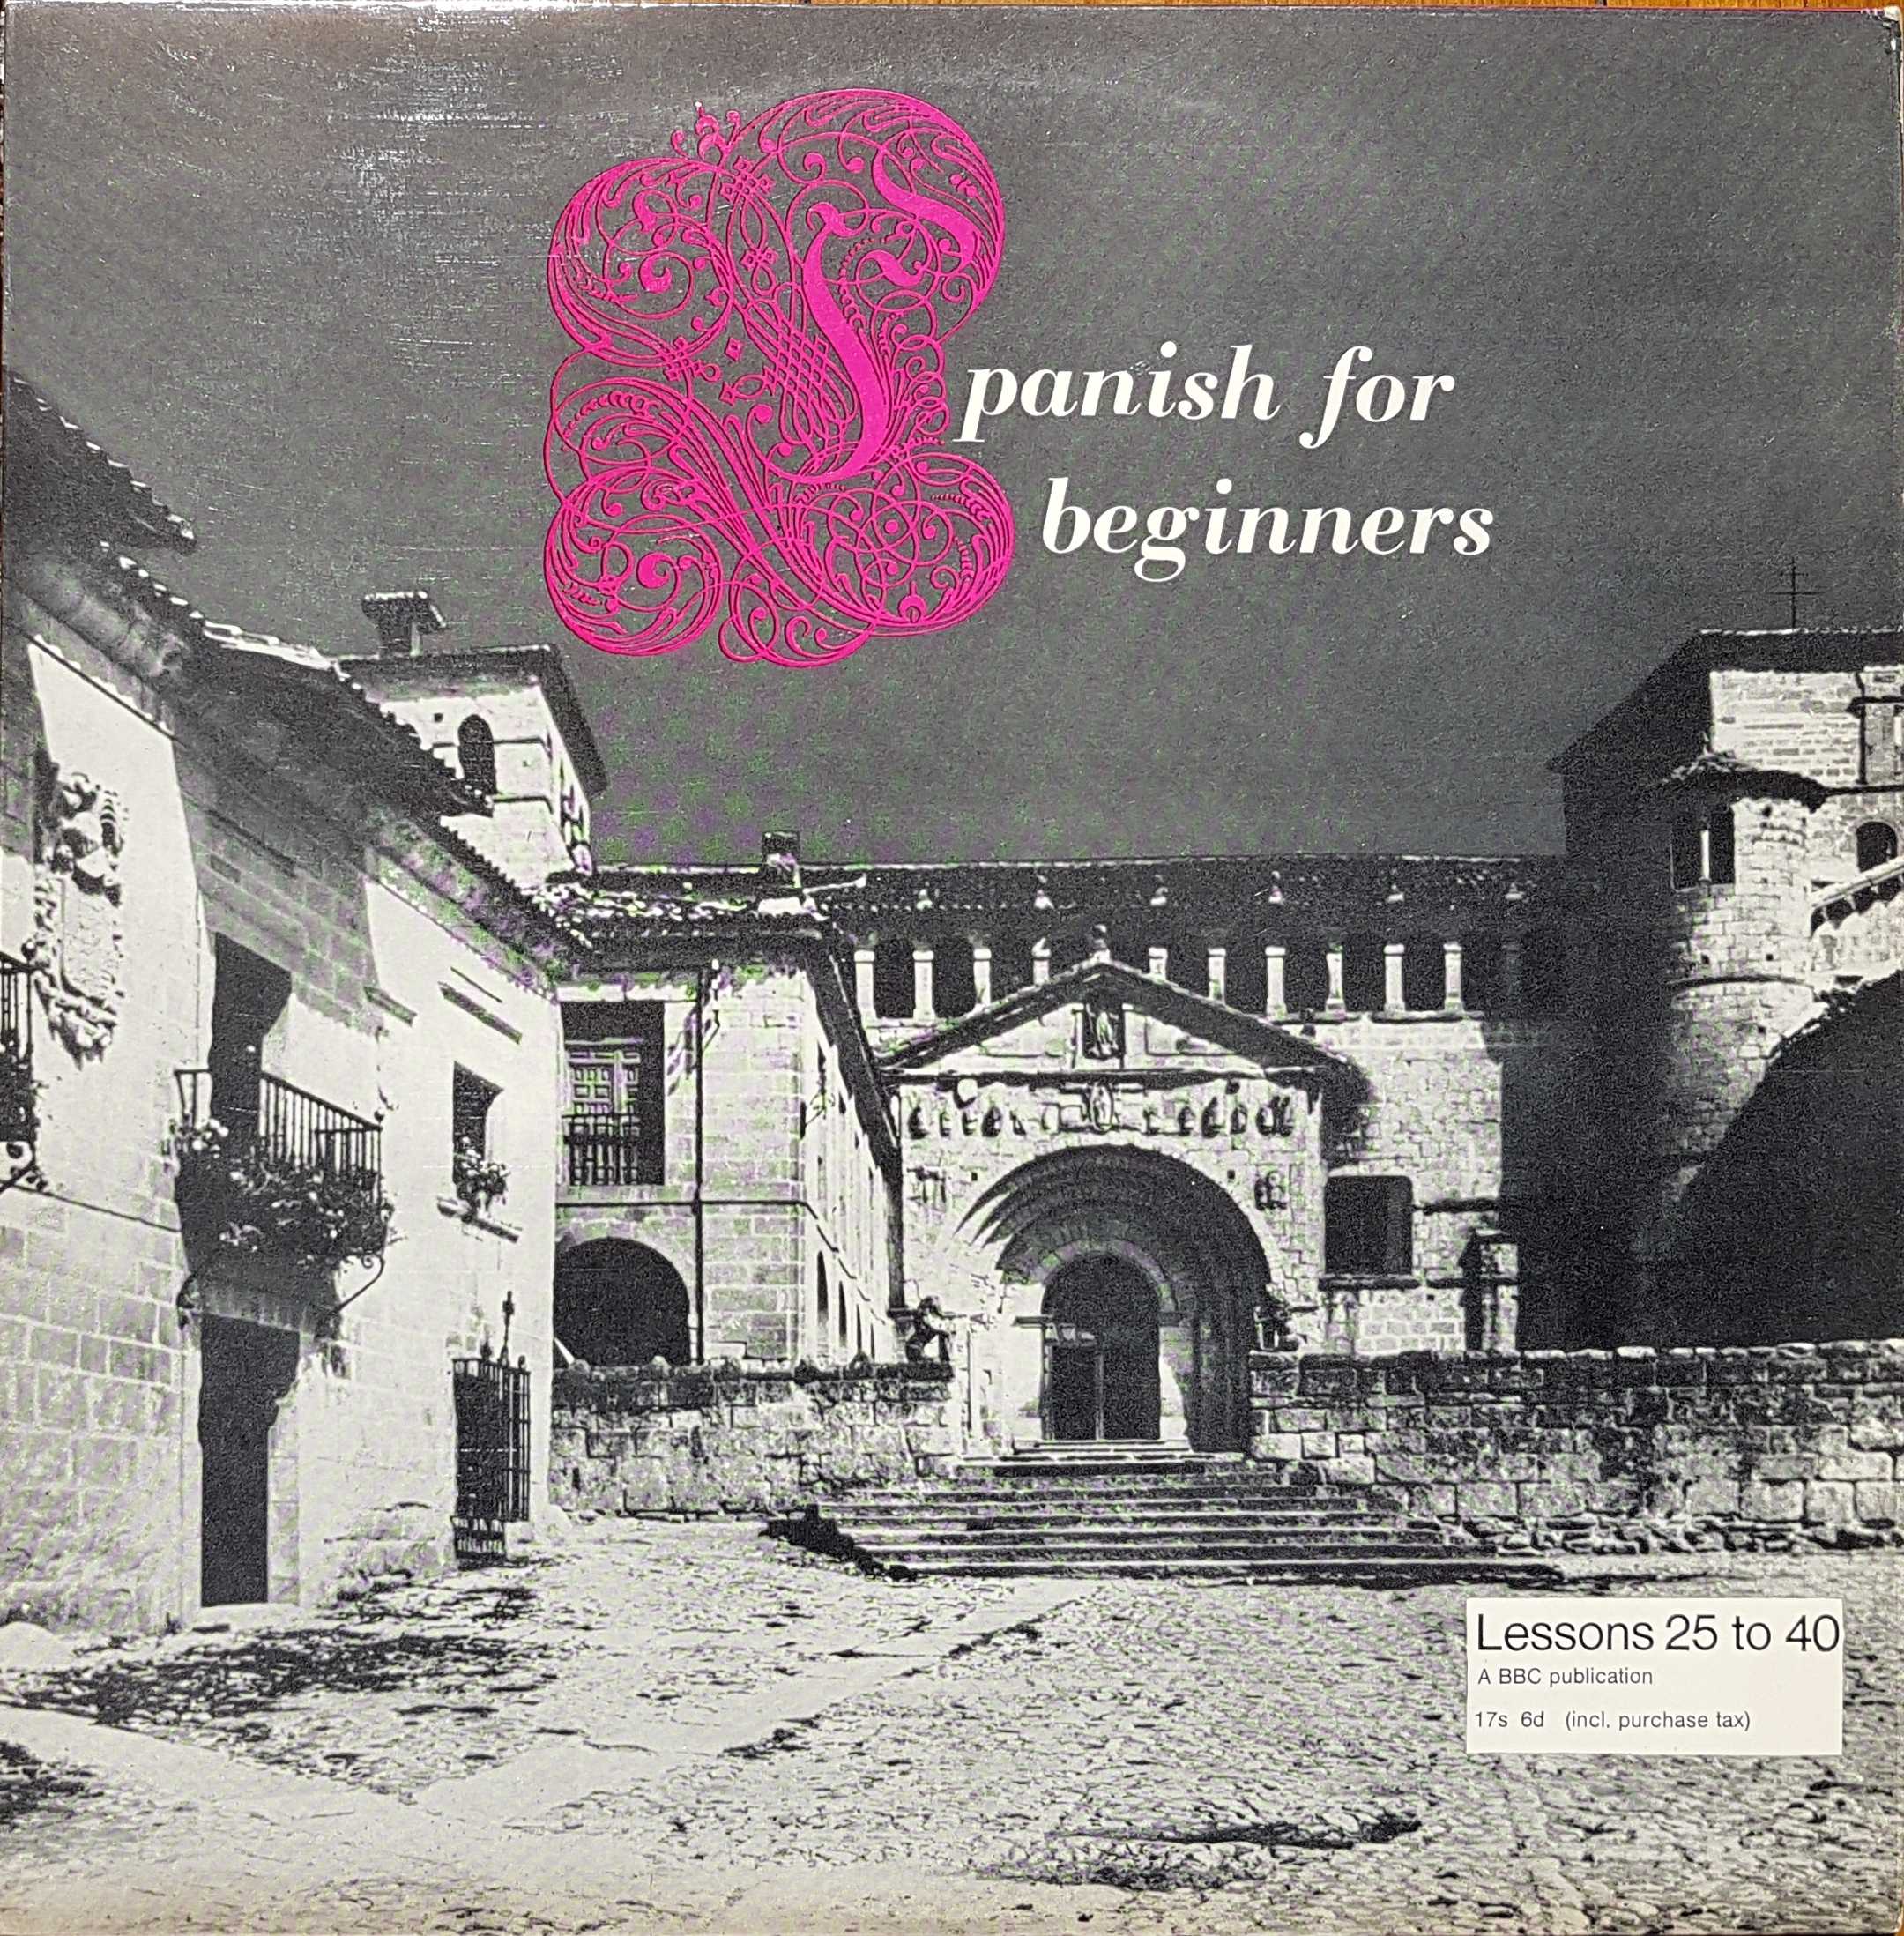 Picture of OP 27/28 Spanish for beginners - Parts 25-40 by artist Anthony Watson / Edith R. Baer from the BBC albums - Records and Tapes library